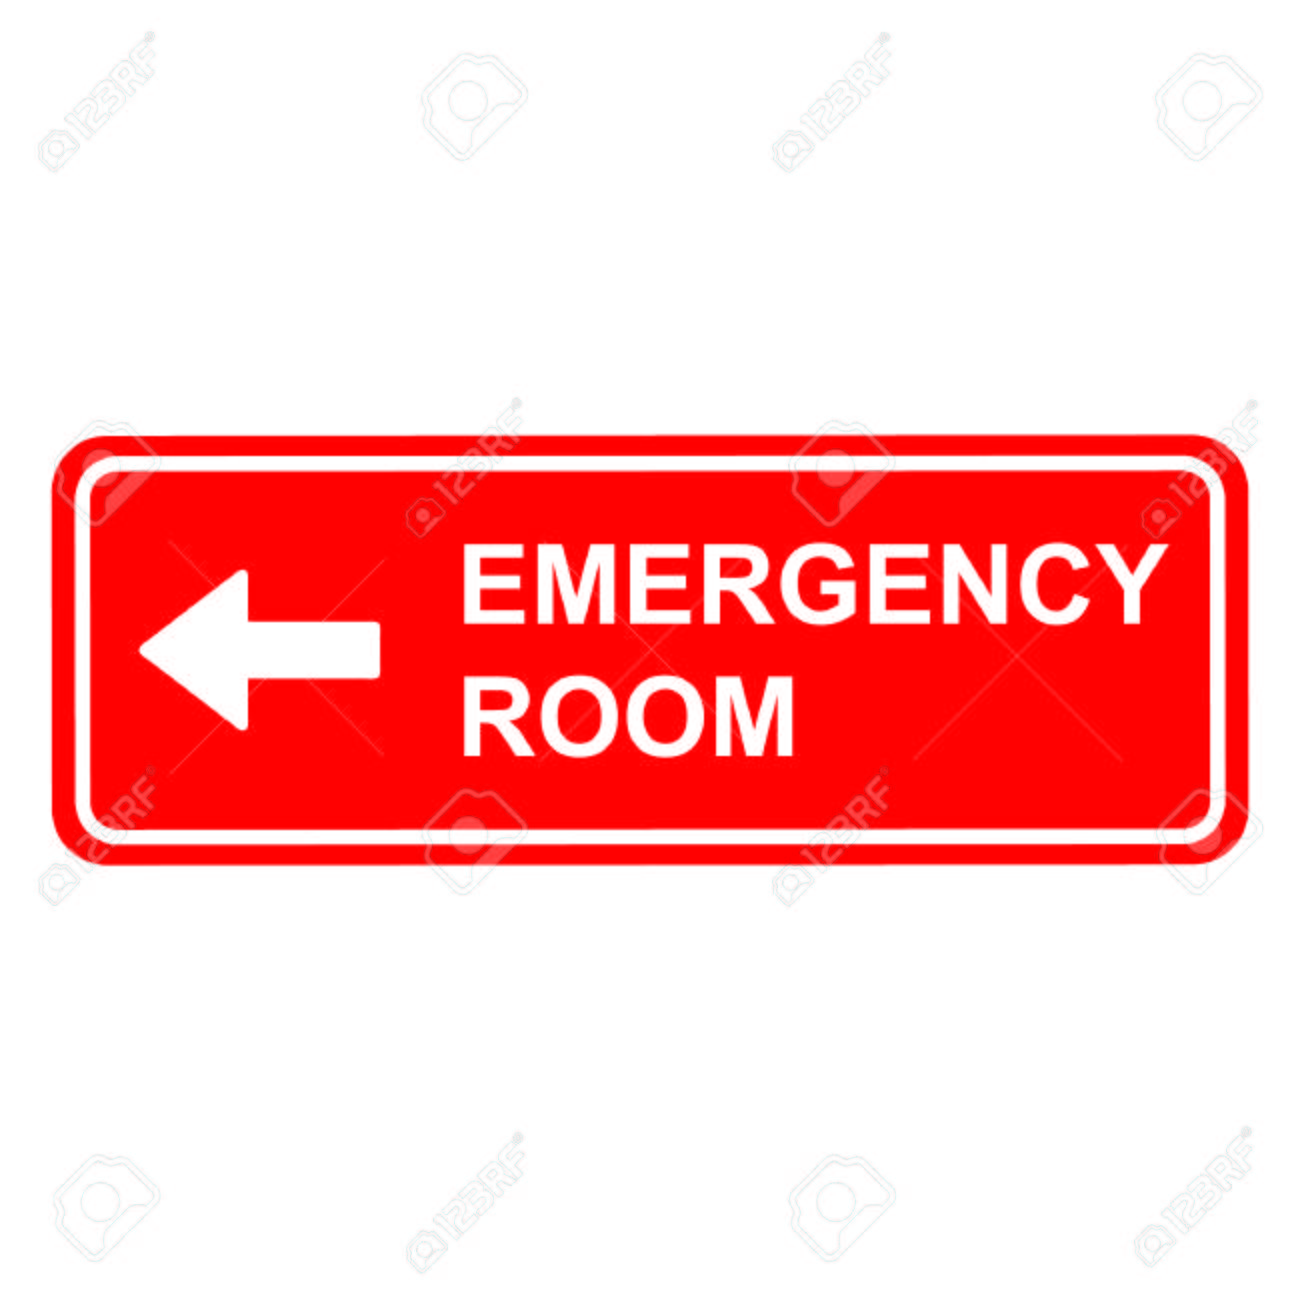 Emergency room clipart 3 » Clipart Station.